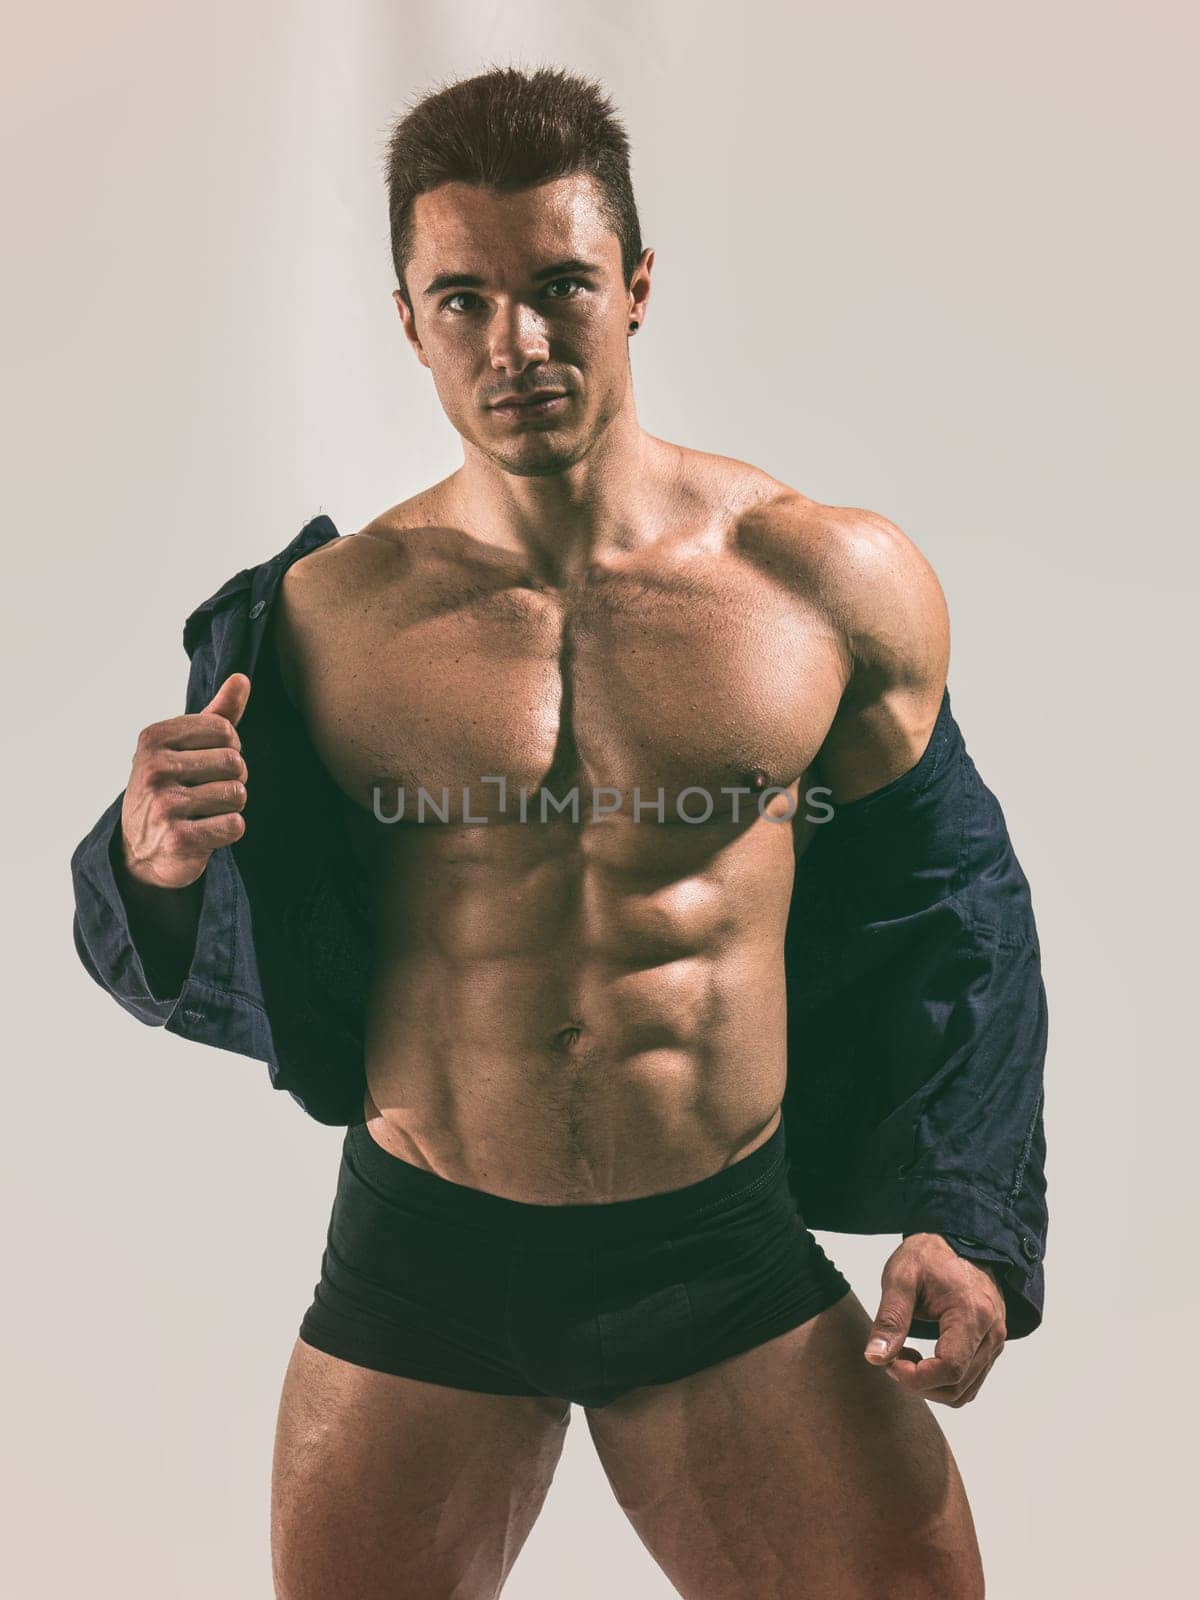 A Strong Display of Masculinity: Flexing Muscles and Striking a Pose by artofphoto